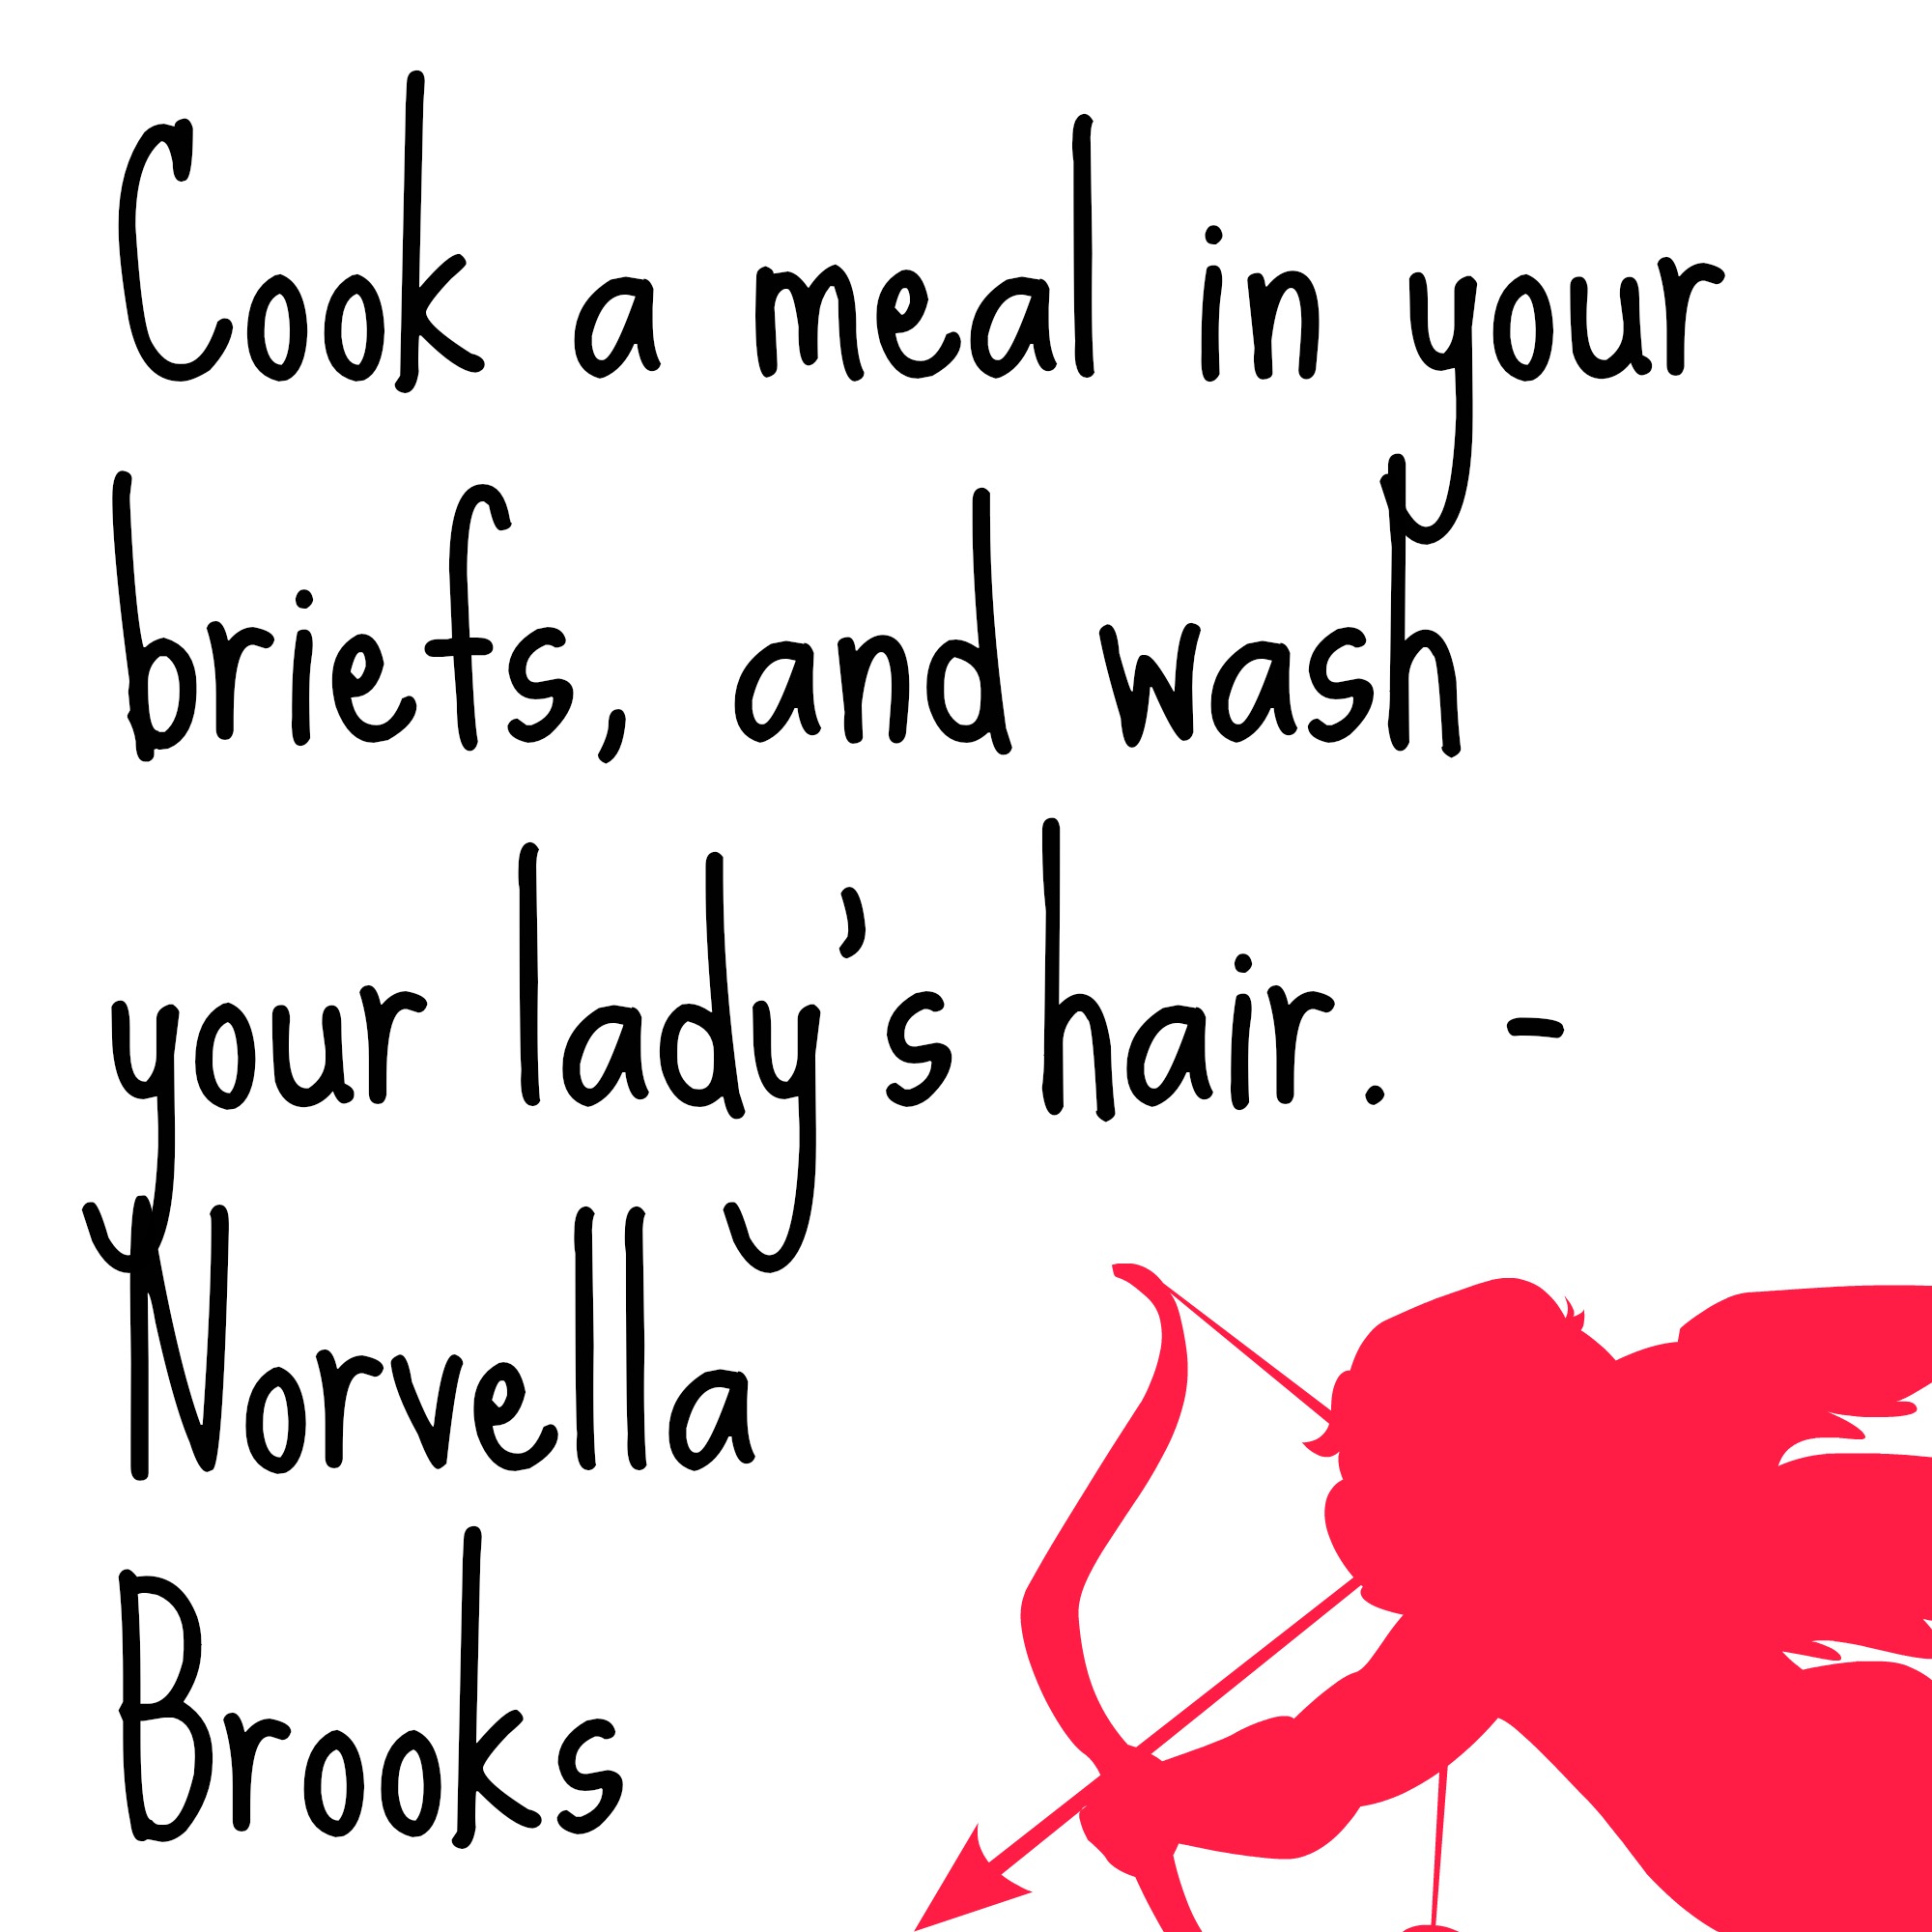 Cook a meal in your briefs, and wash your lady's hair.